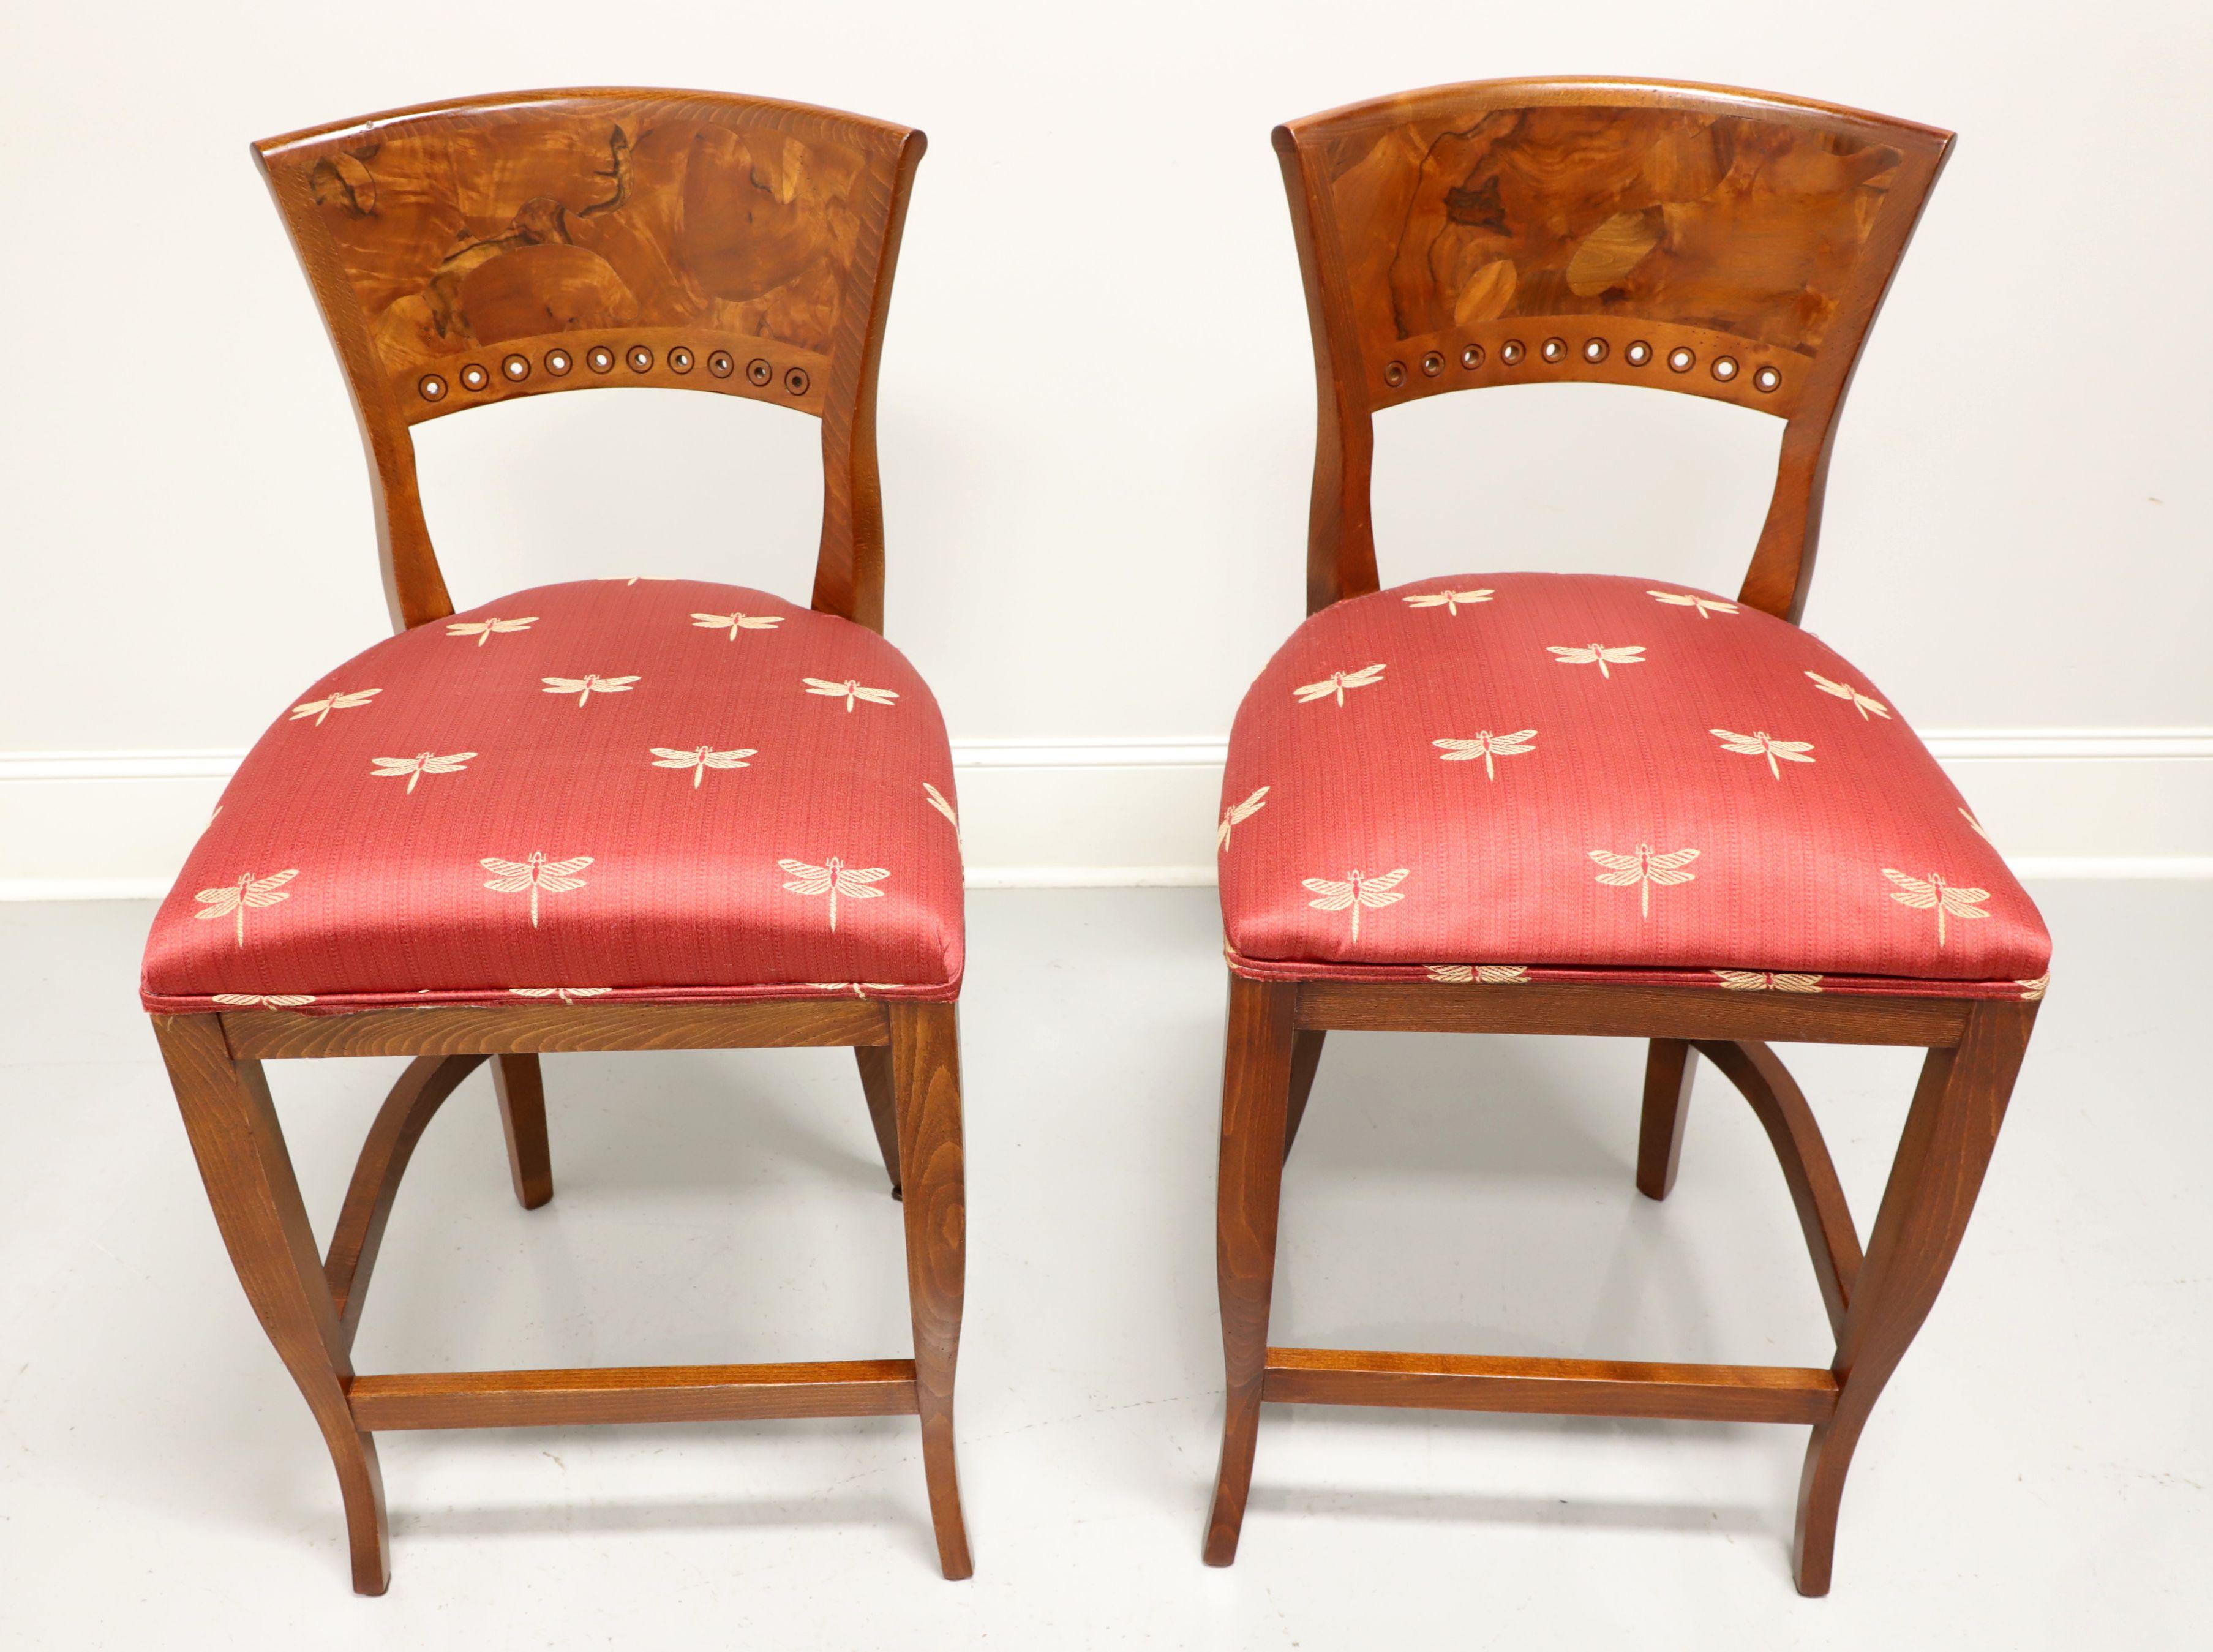 A pair of Neoclassical style counter height stools by Emerson et Cie, of High Point, North Carolina, USA. Tiger & burl oak backrests, salmon colored fabric with gold fireflys upholstered seats, saber legs with curved stretchers and footrest. Made in